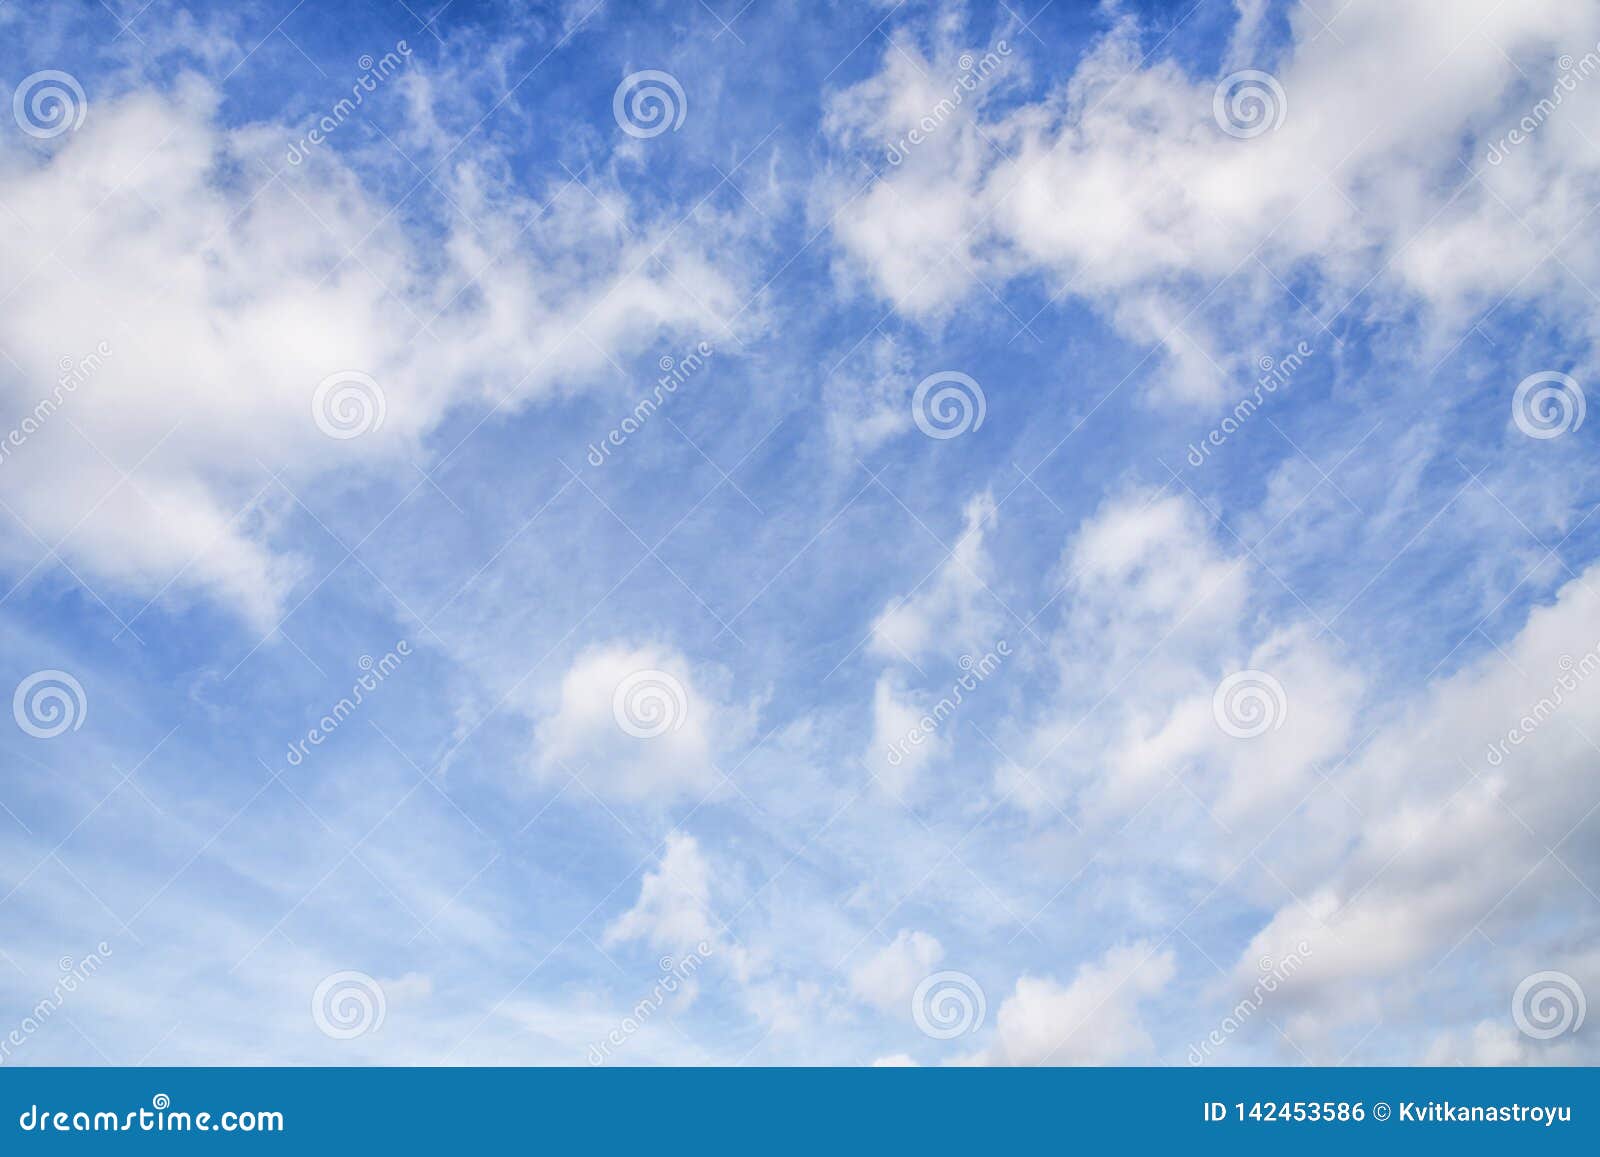 blue sky with cirro cumulus and puffy white clouds. sky background